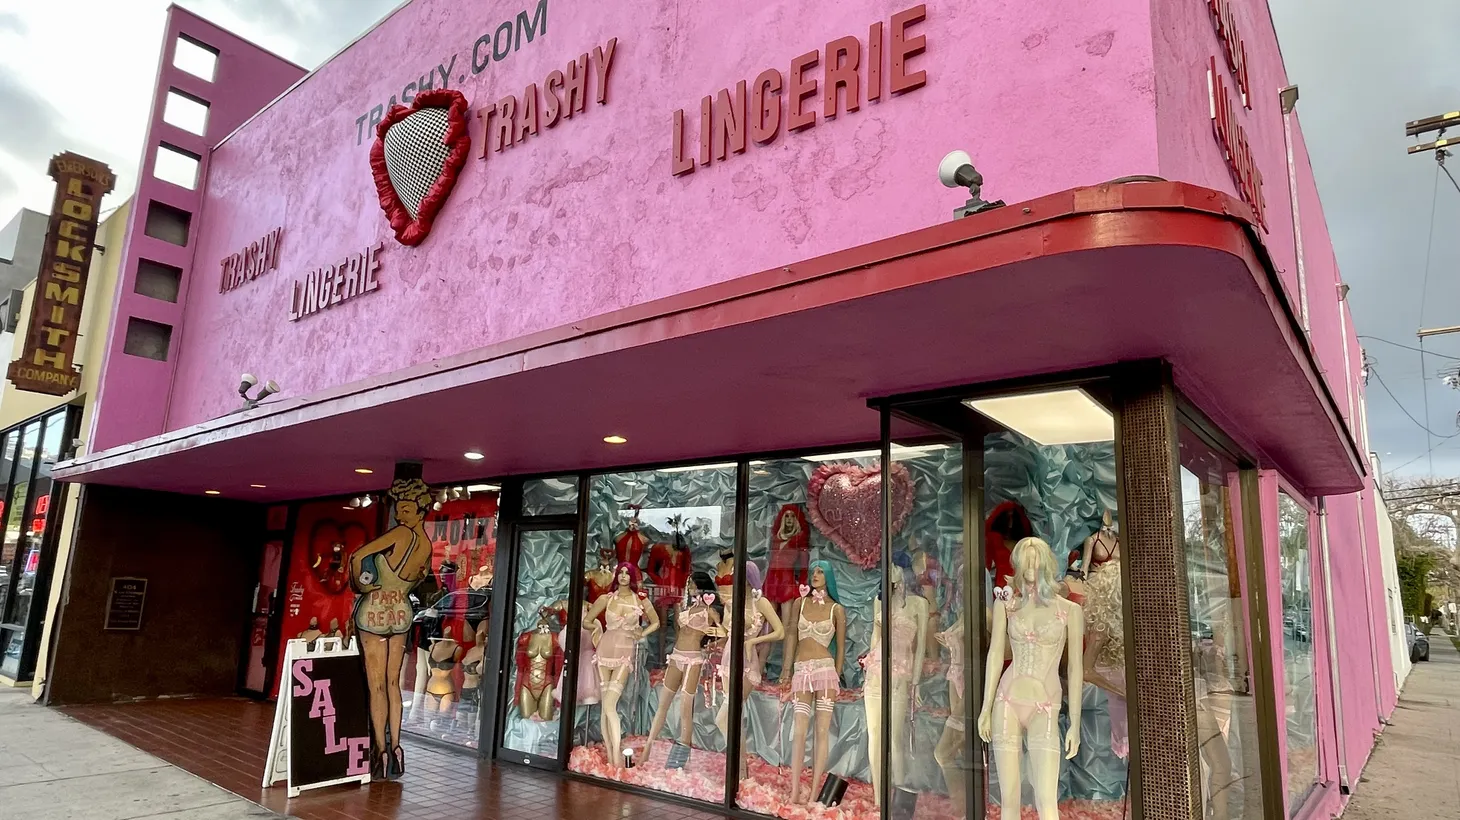 “People come in and they say, ‘It's for me,’ they're not ashamed or embarrassed or intimidated,” says Randy Shrier, owner of Trashy Lingerie.